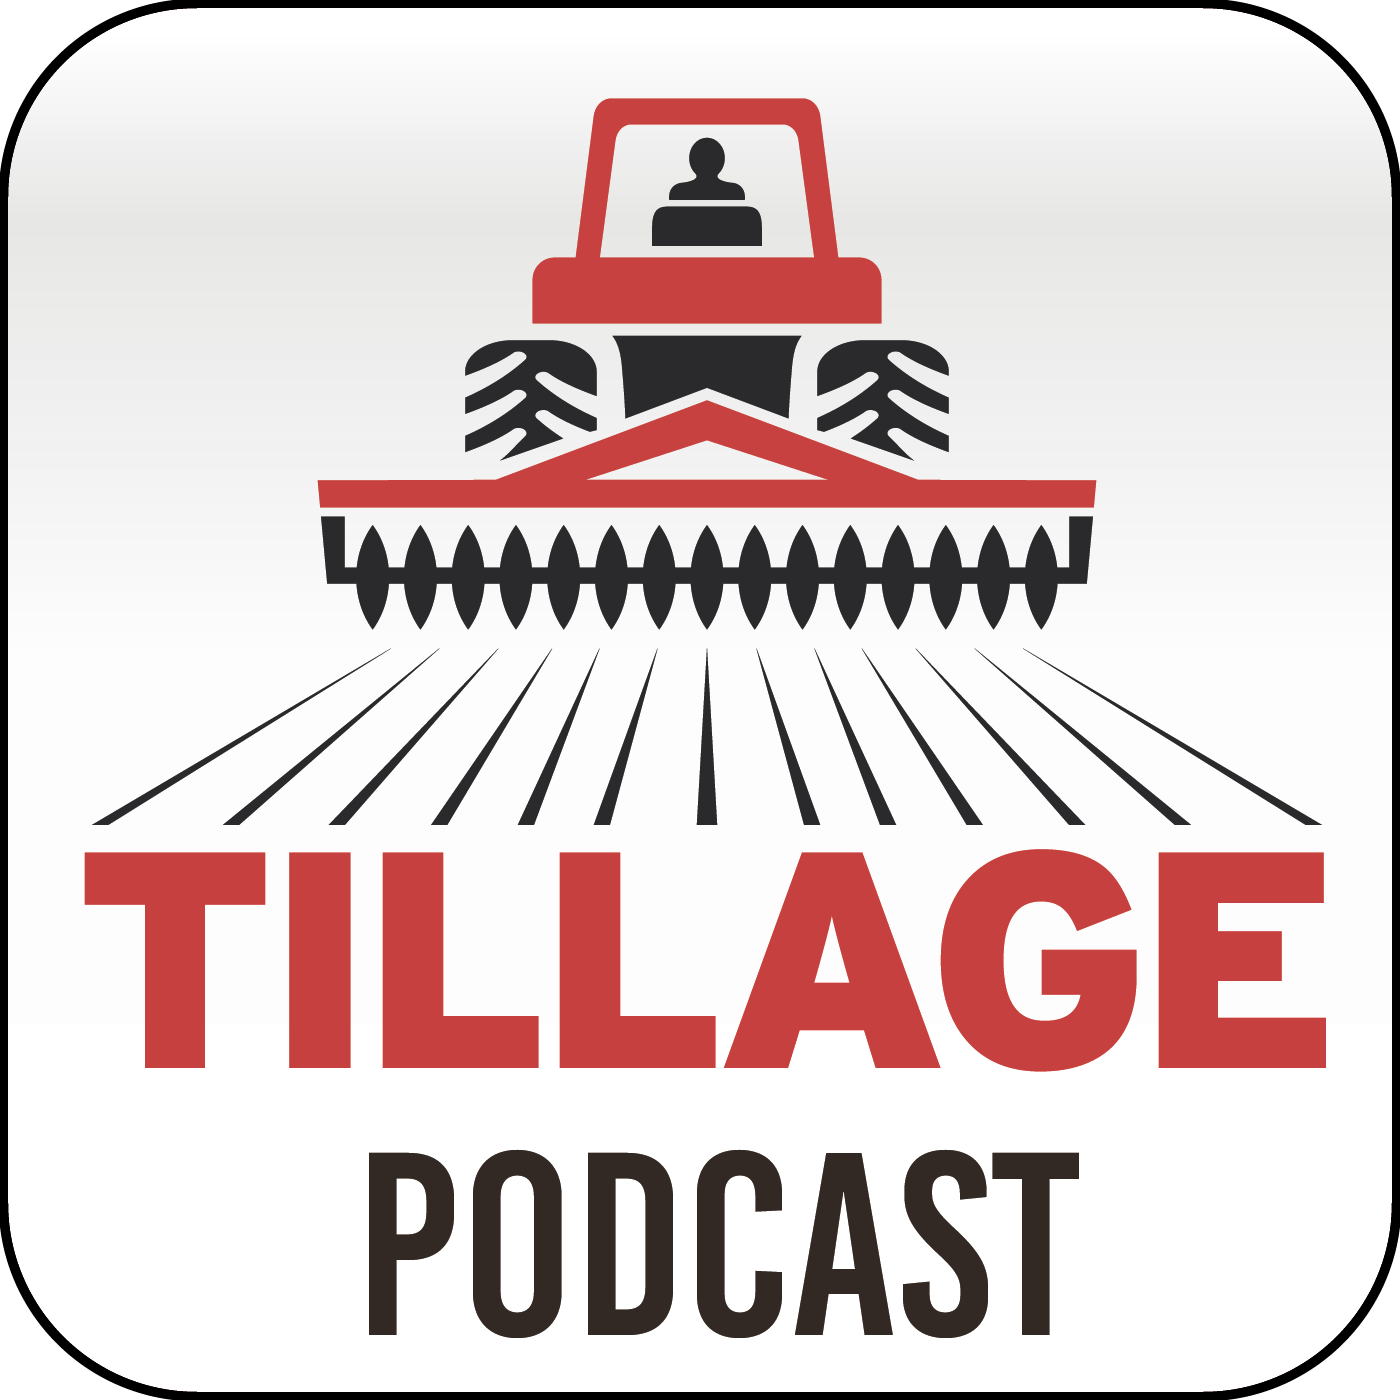 Ep 992: Tillage podcast: Getting ready for the drier weather